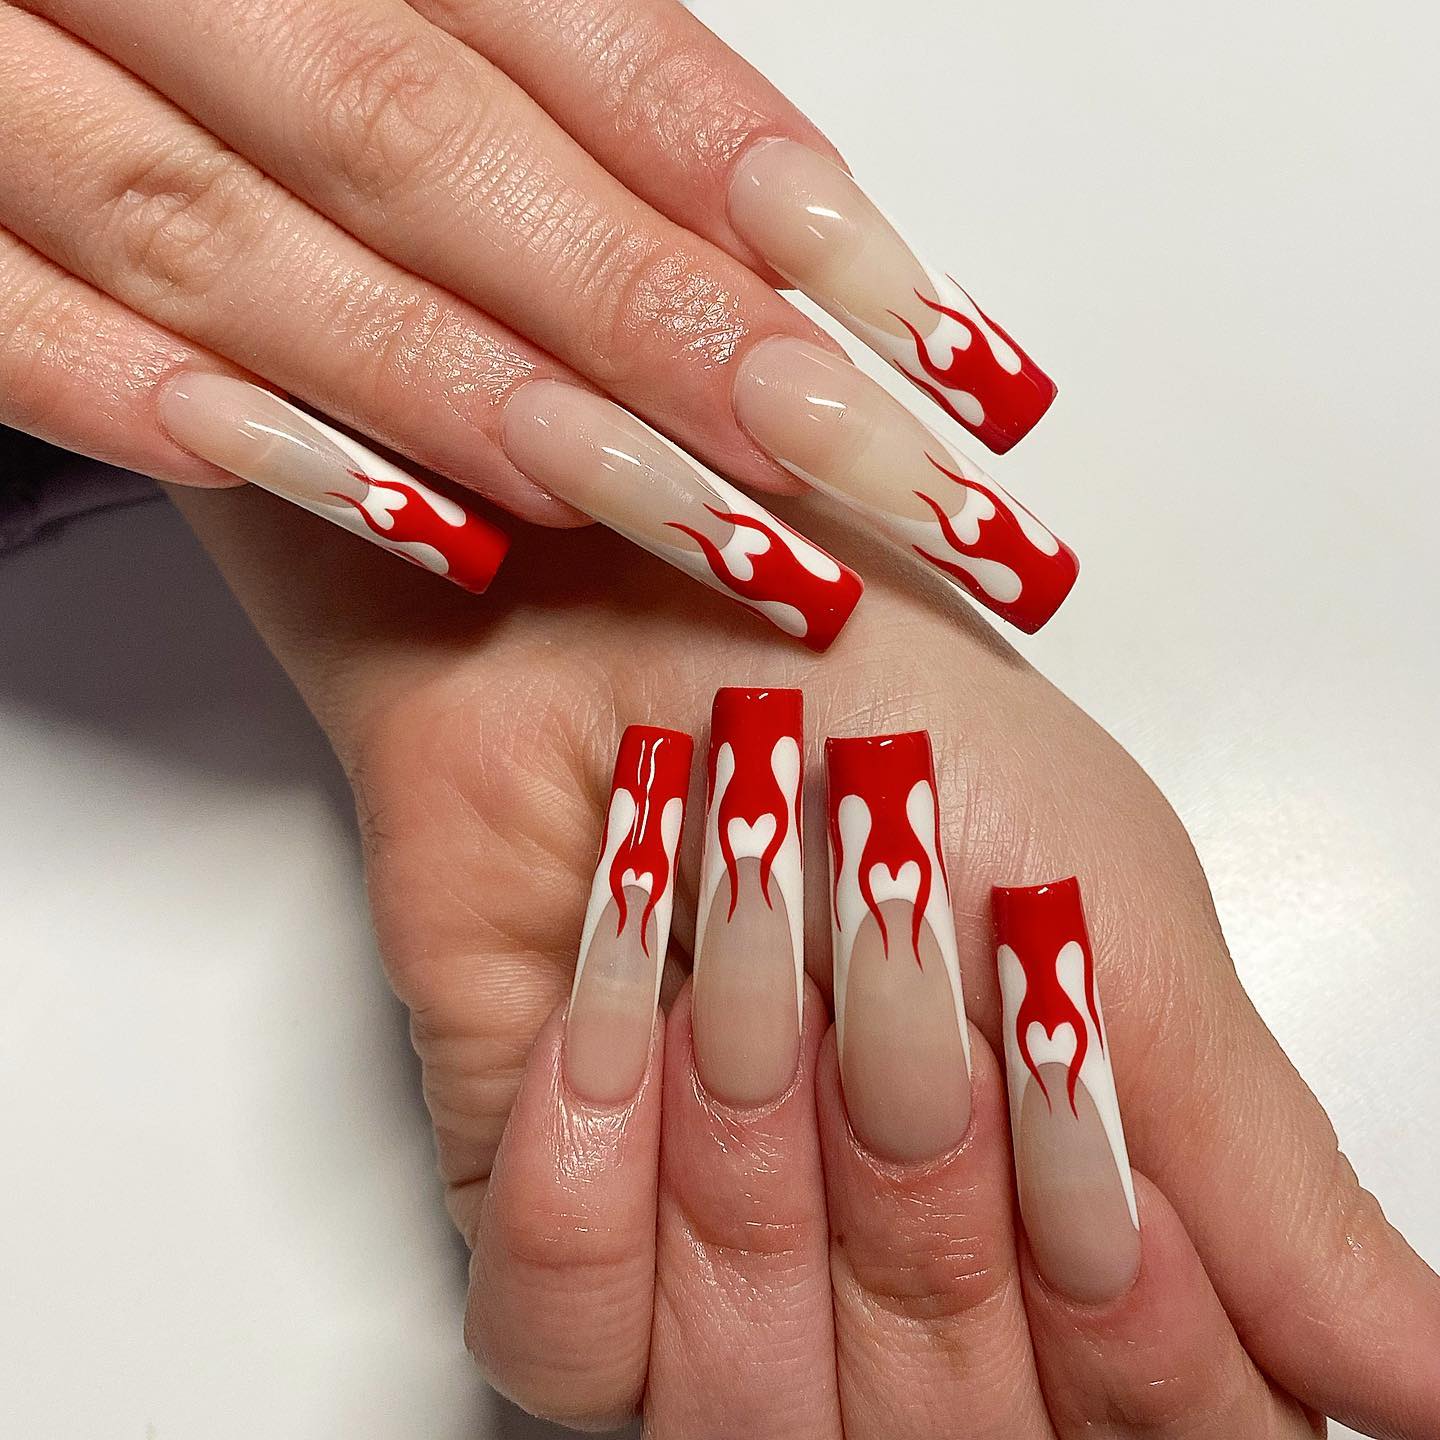 Long acrylic square nails require boldness to get, right? If you are bold enough to get them, let's take your boldness to another level with red flame nail art. They're gonna shine on your French mani.